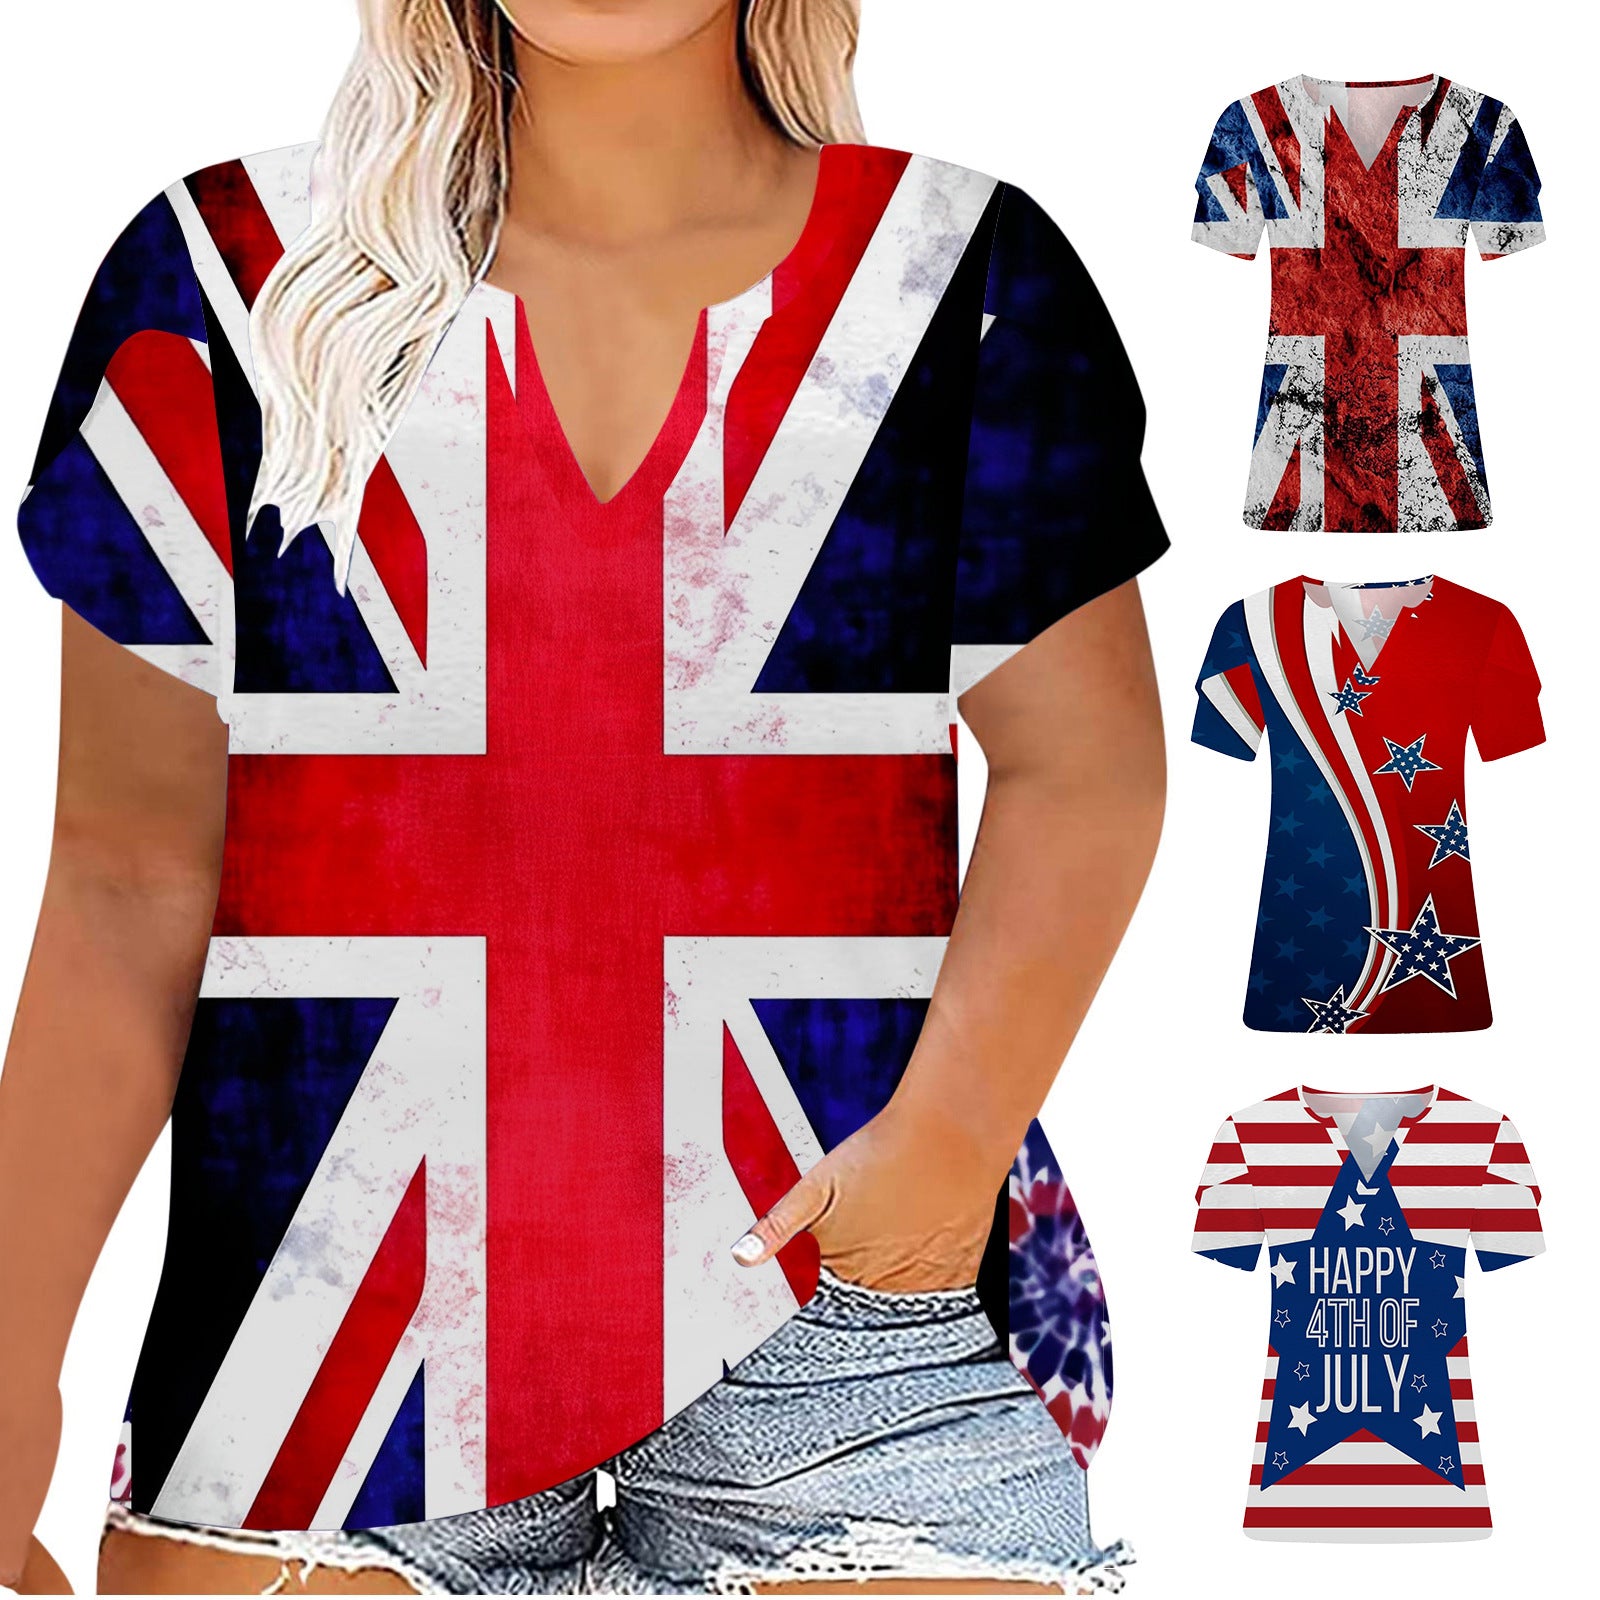 Women's Independence Day Printed Summer Short-sleeved T-shirt Plus Size